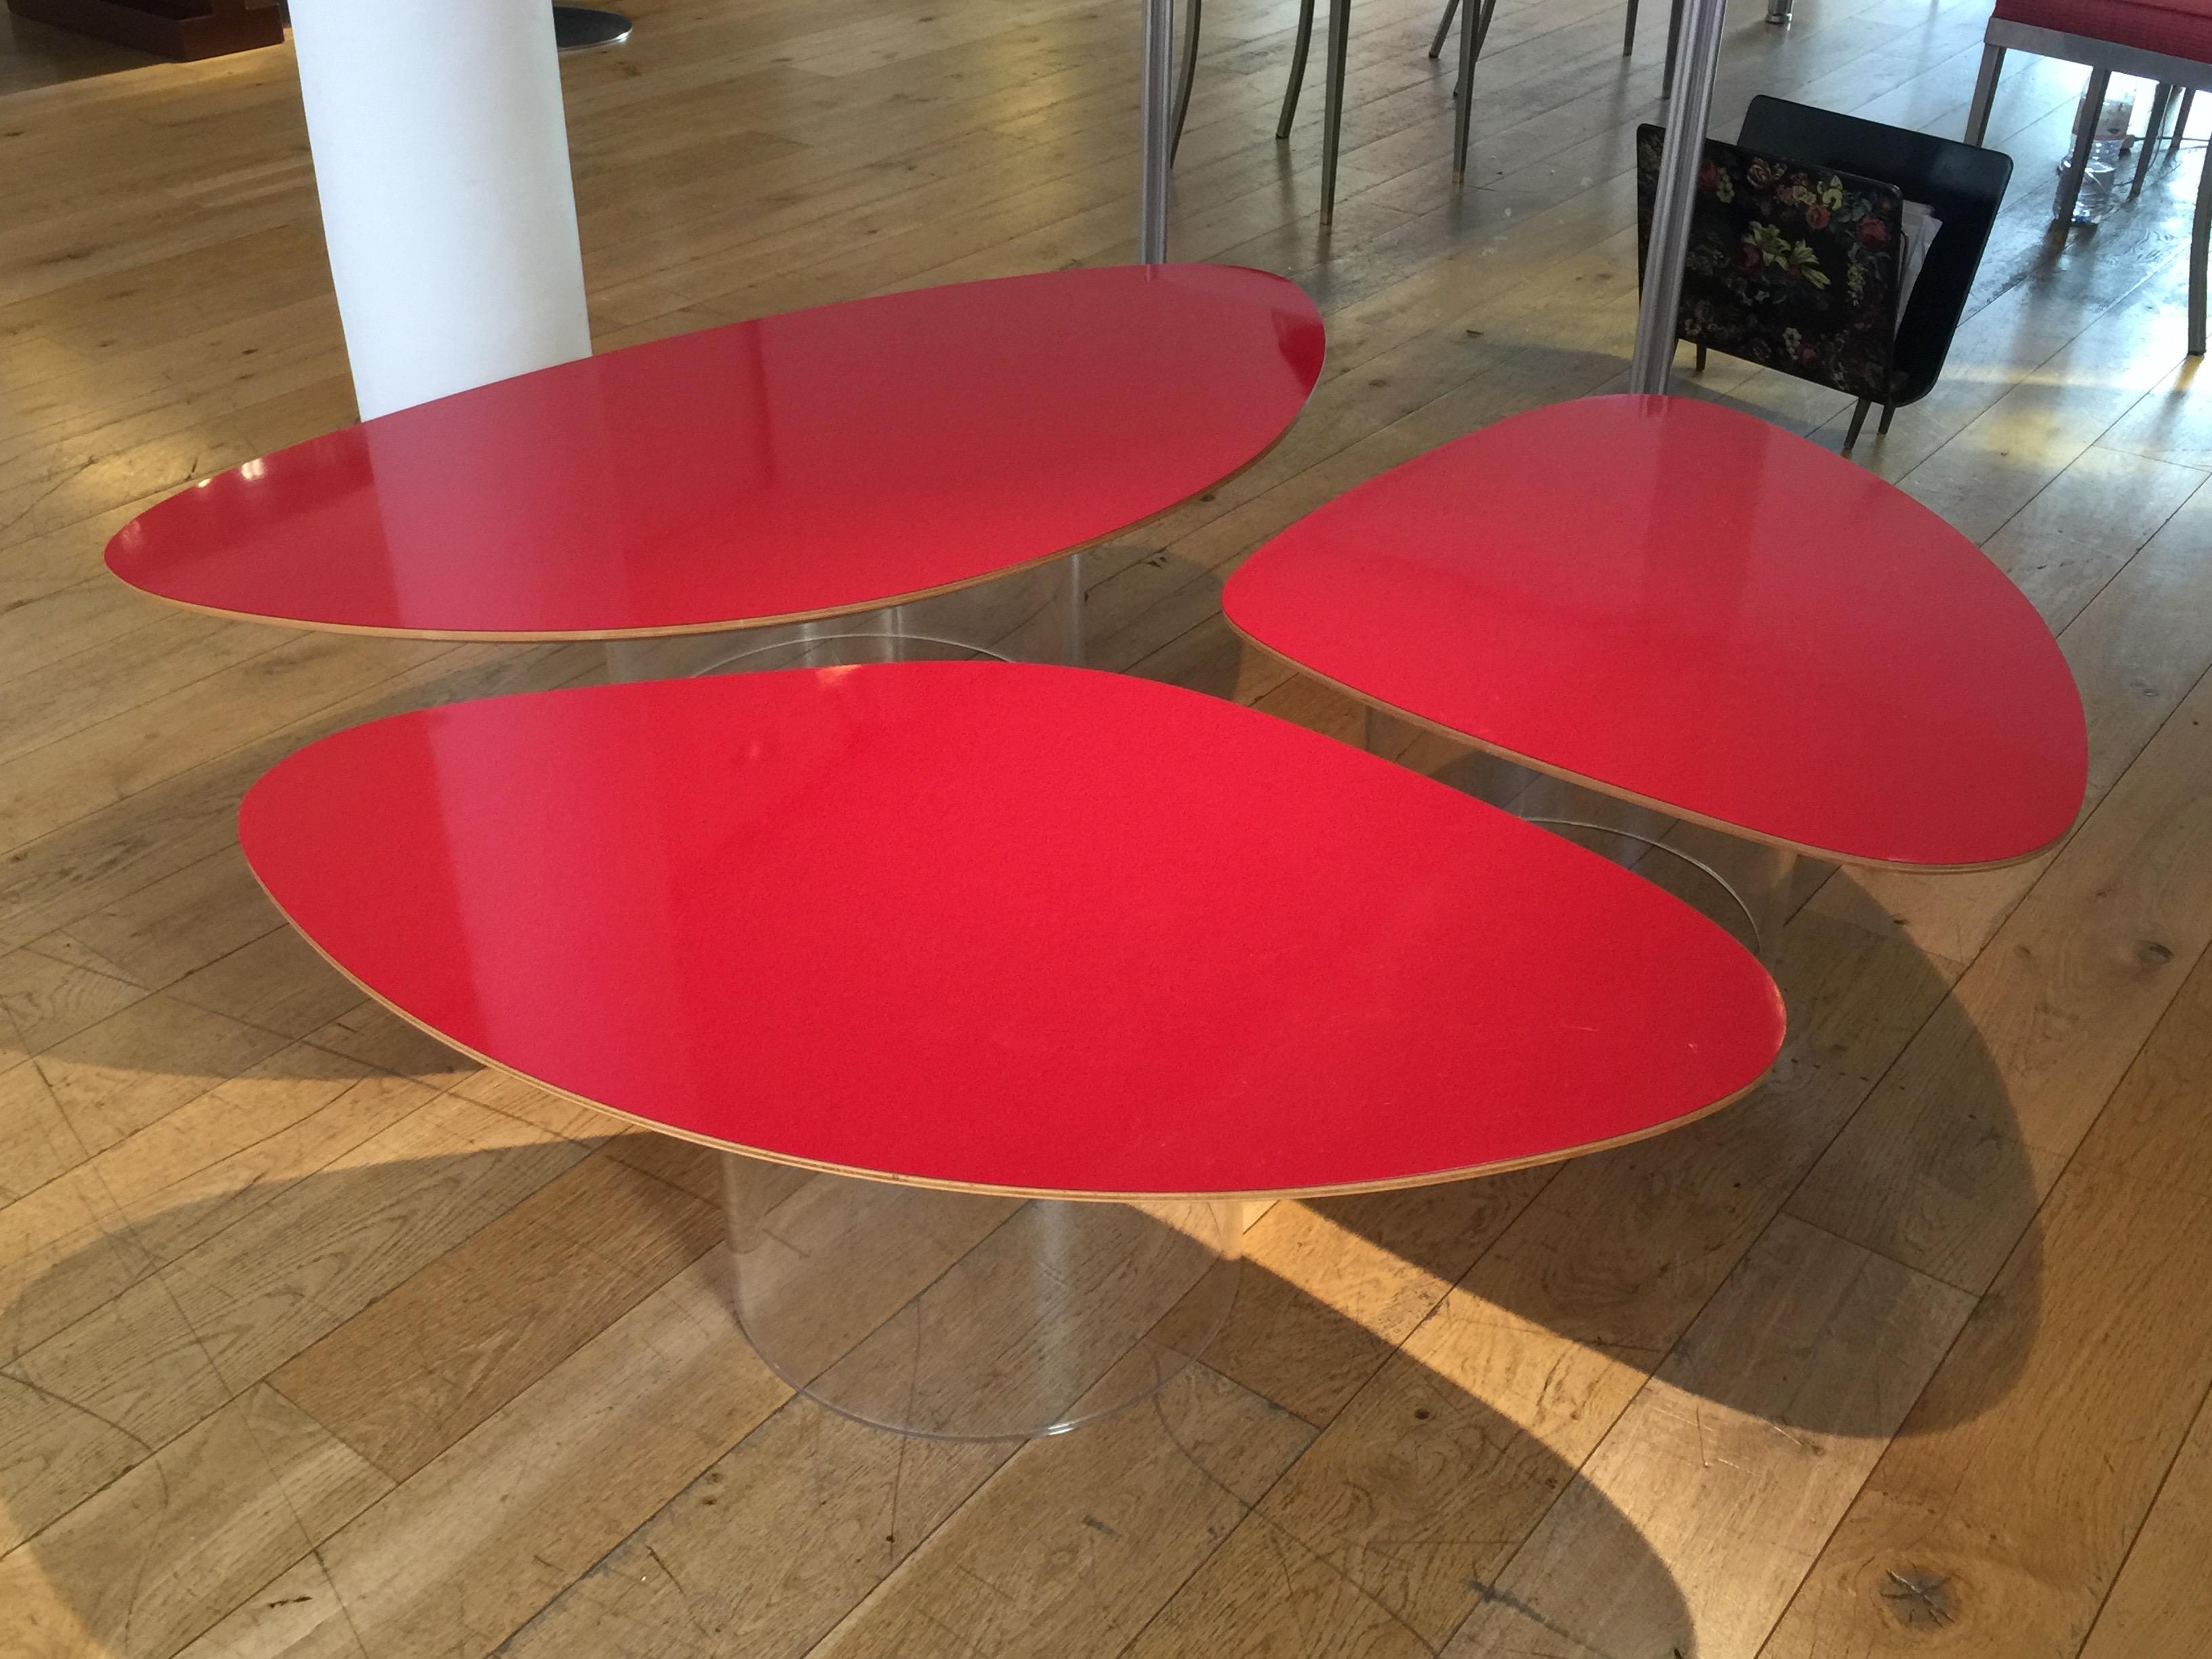 3 elements in different sizes in deep red laminate on beech plywood, each on transparent perspex drum base. The prototype was designed by Janette Laverrière in 1966, and was produced in 2004 by Perimeter Editions in a limited edition of 25 examples.